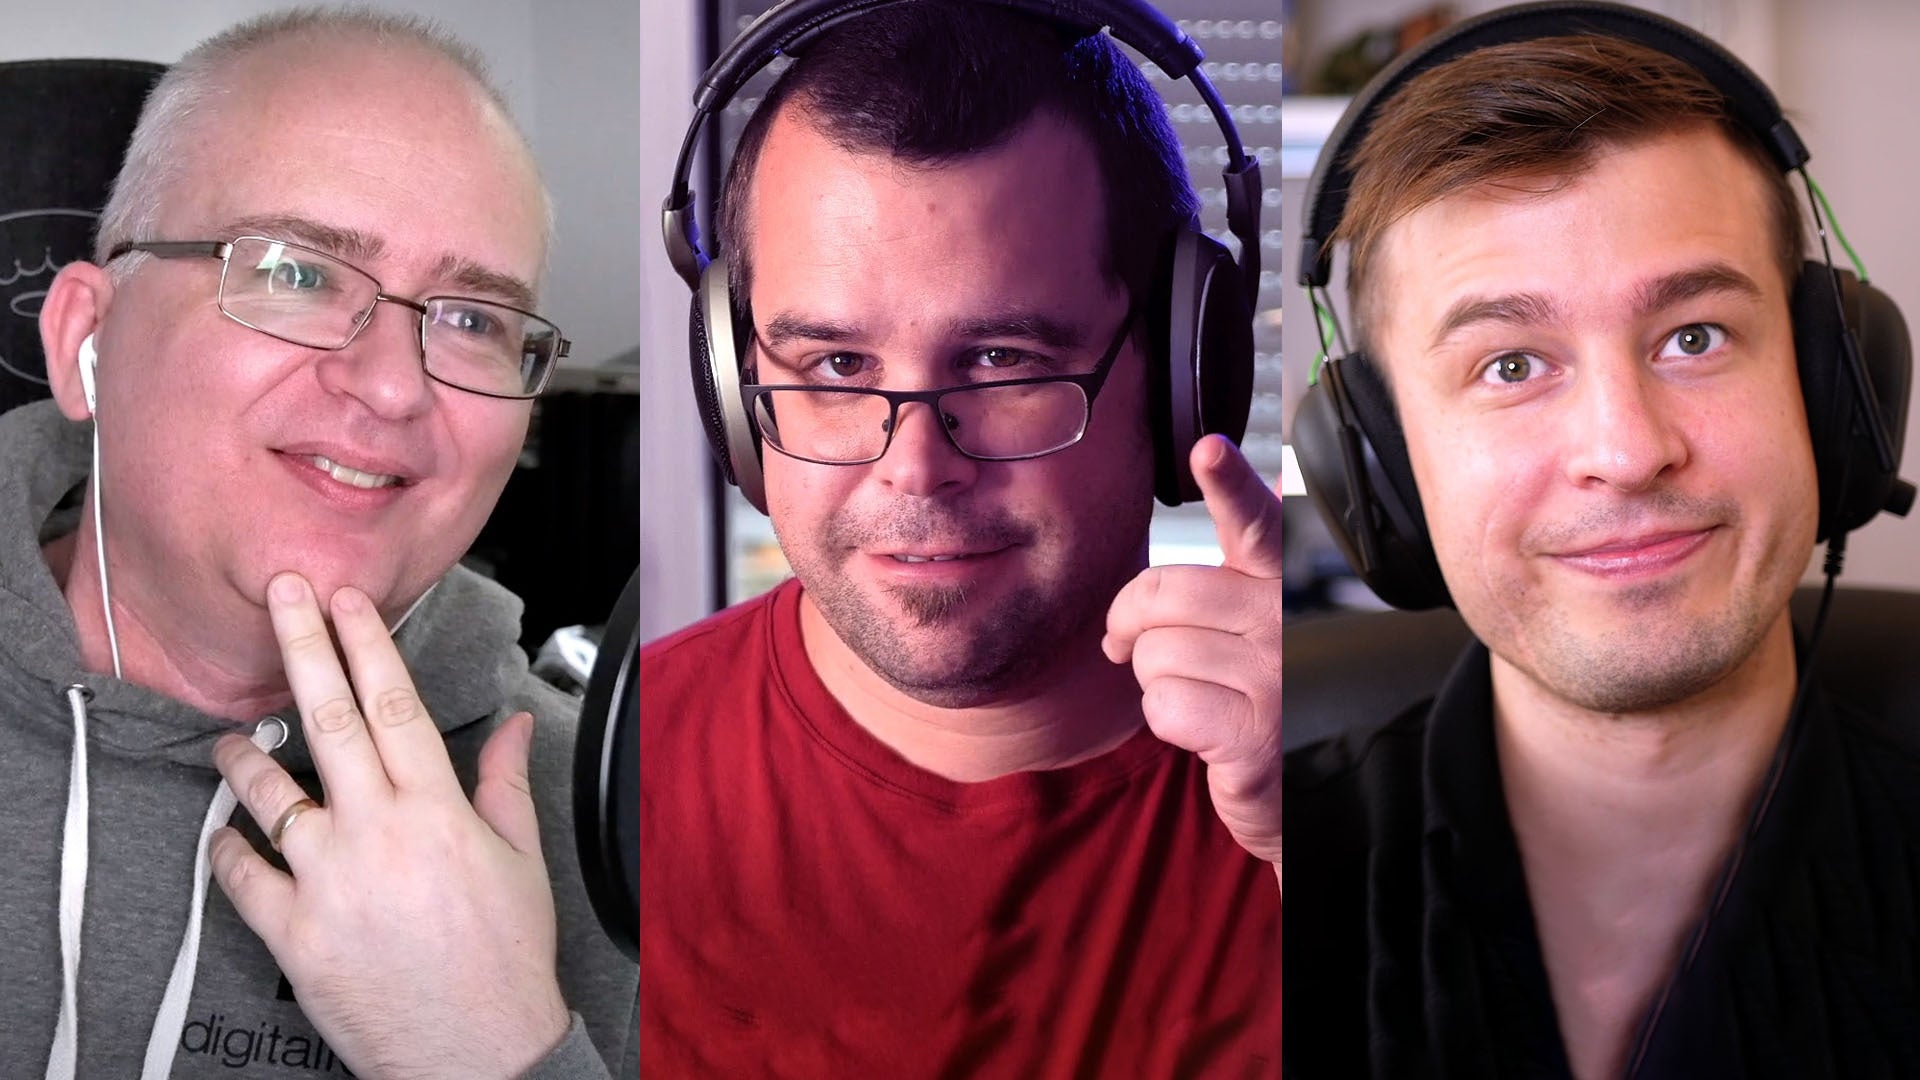 digital foundry direct 77 featuring john, rich and alex